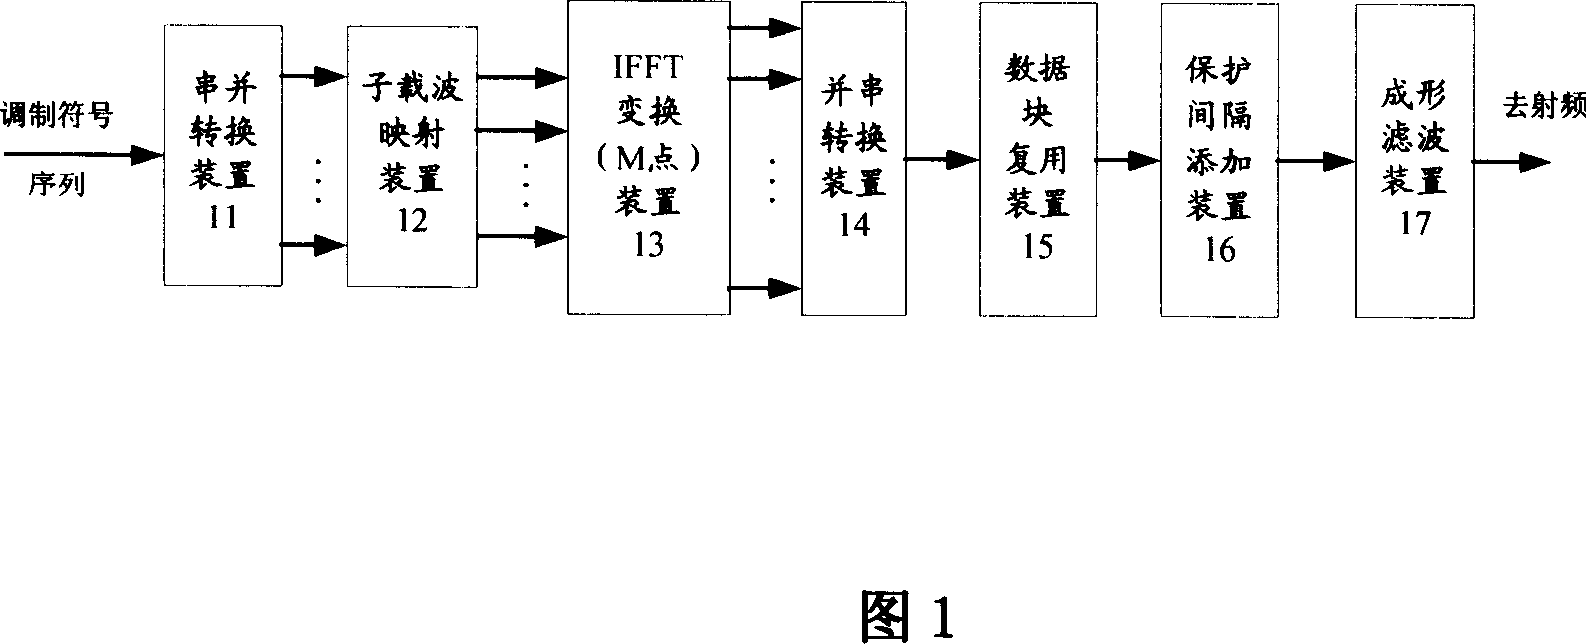 Multi-cast and unicast compatible orthogonal frequency division and time division multiplexing transmission, receiving machine and its method